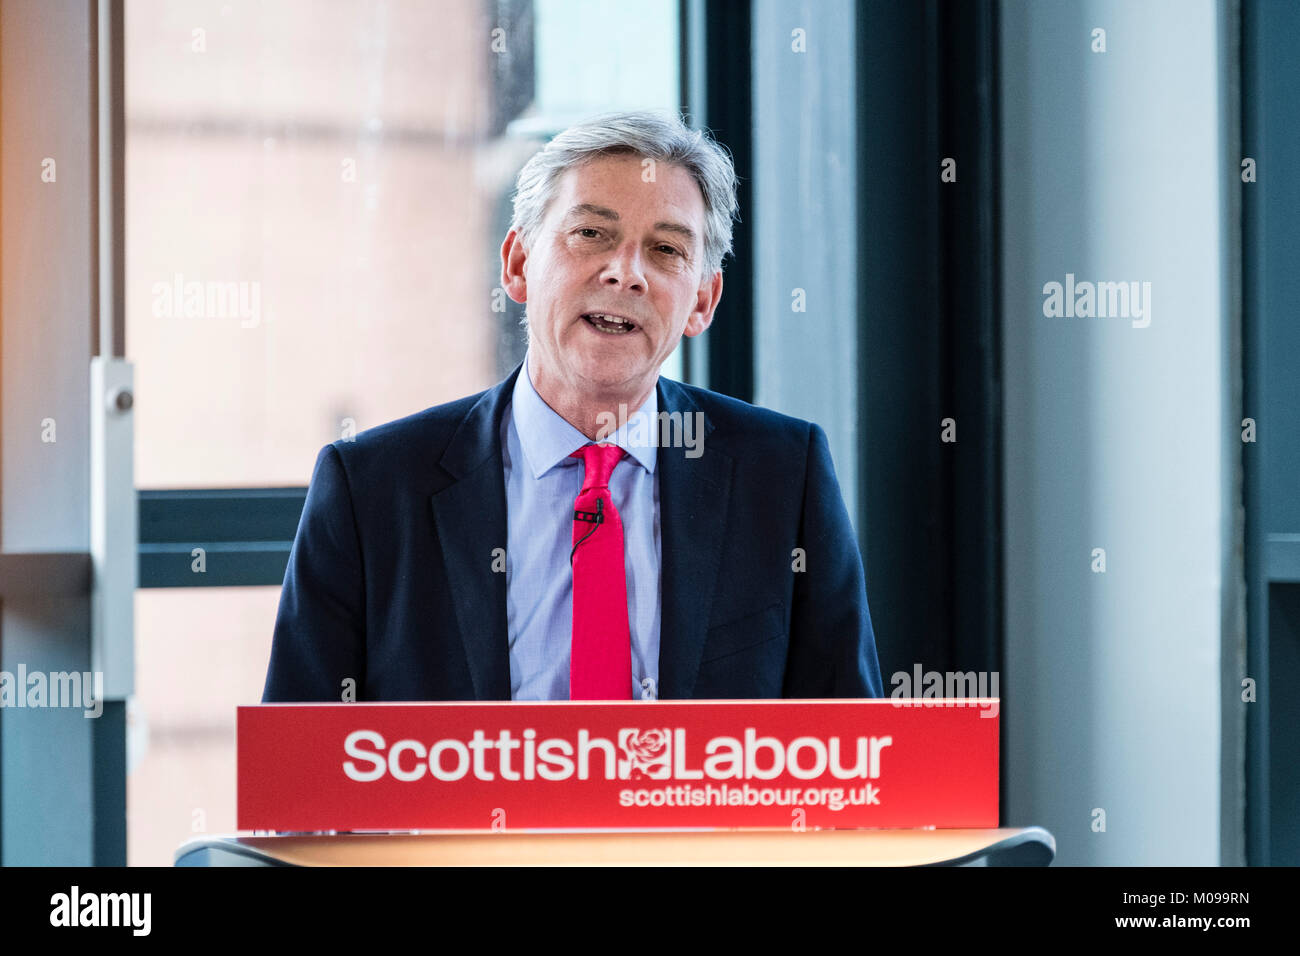 Dundee, Scotland, UK. 19th Jan, 2018. Scottish Labour Party Leader Richard Leonard delivers major speech at Abertay University in Dundee outlining Scottish Labour's policies. Credit: Iain Masterton/Alamy Live News Stock Photo